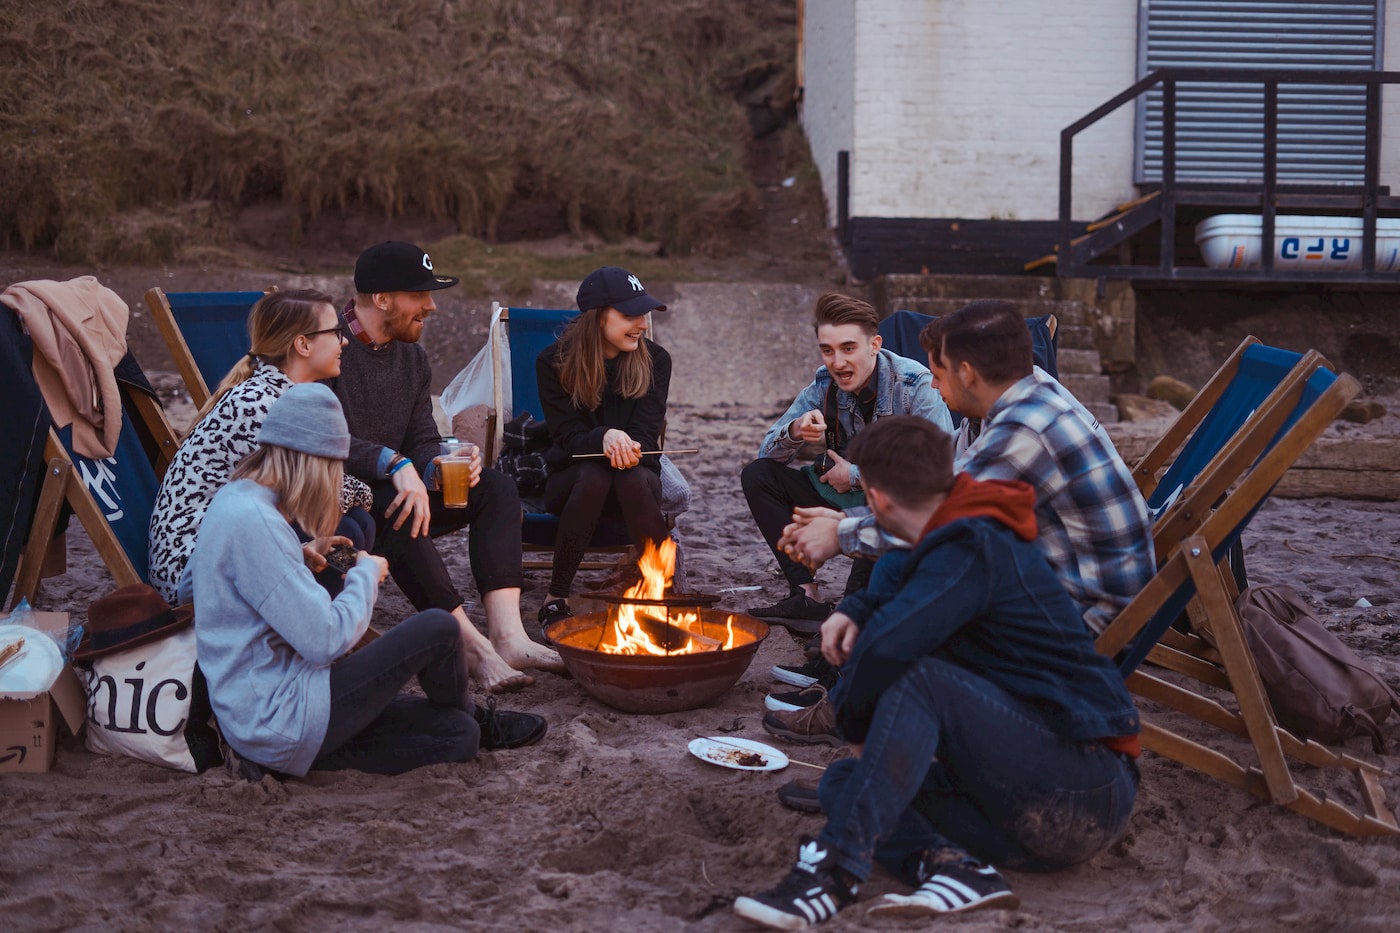 Group of friends drinking beer and hanging out around a fire on the beach.